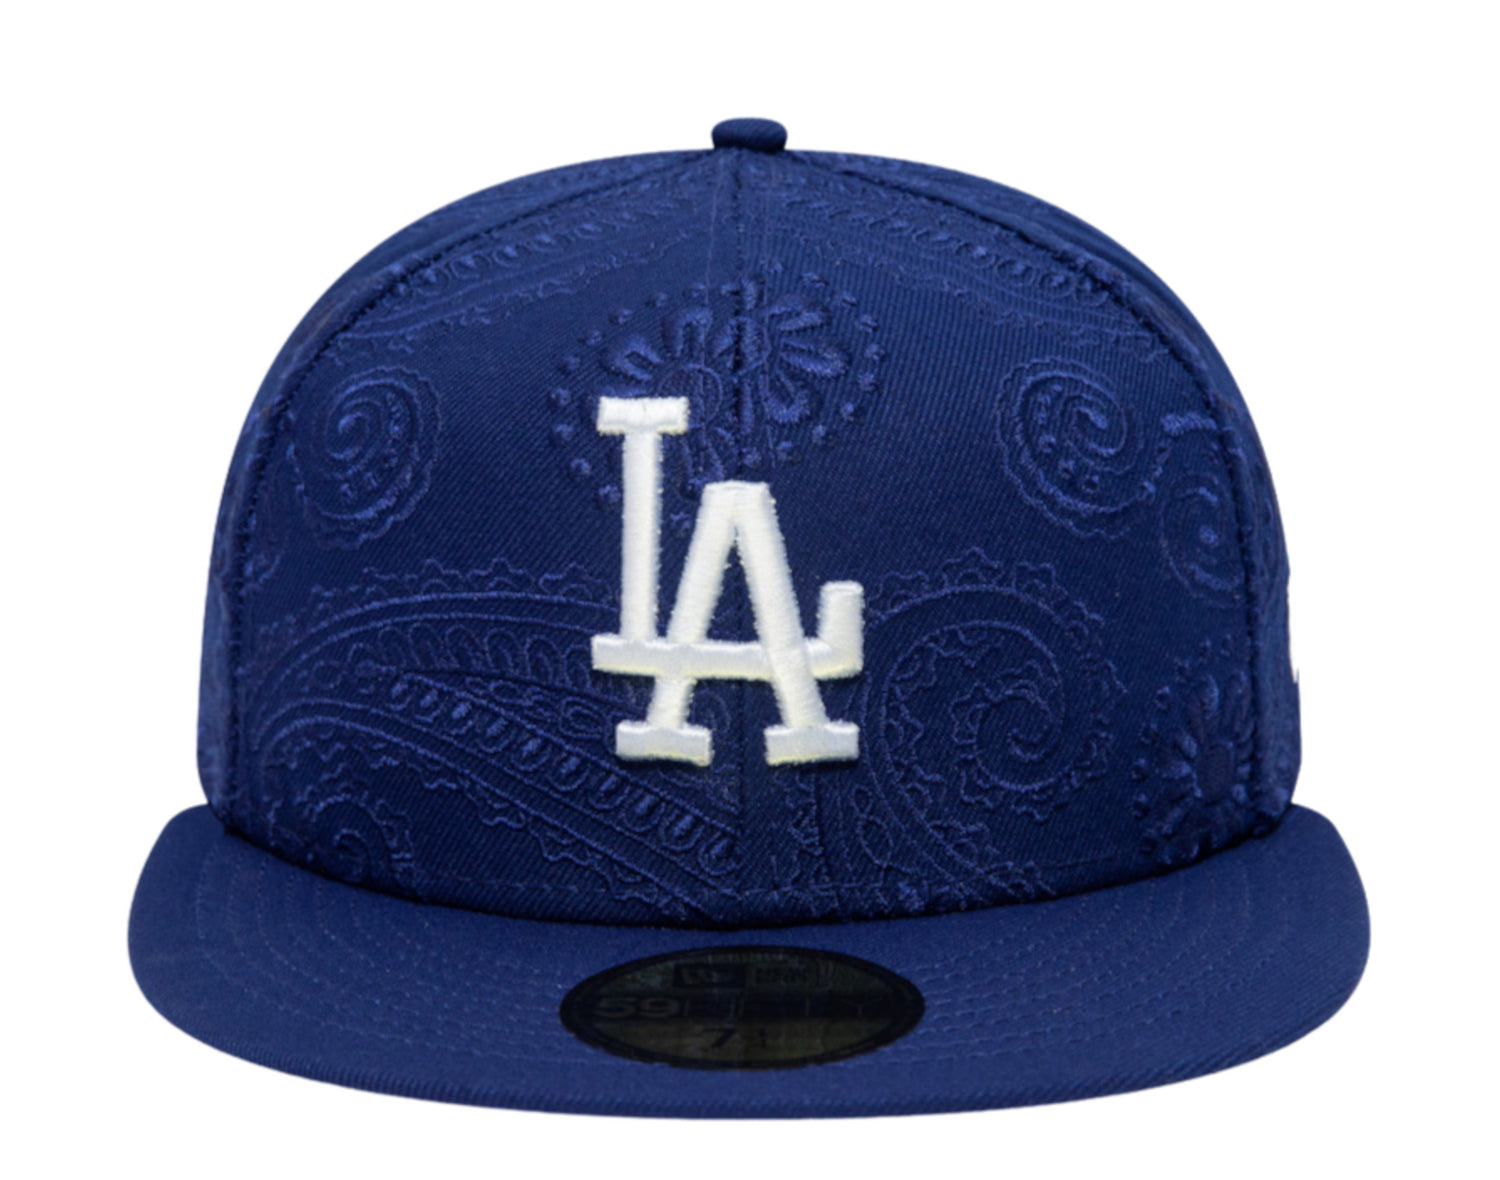 New Era 59Fifty MLB Los Angeles Dodgers Swirl Fitted Hat